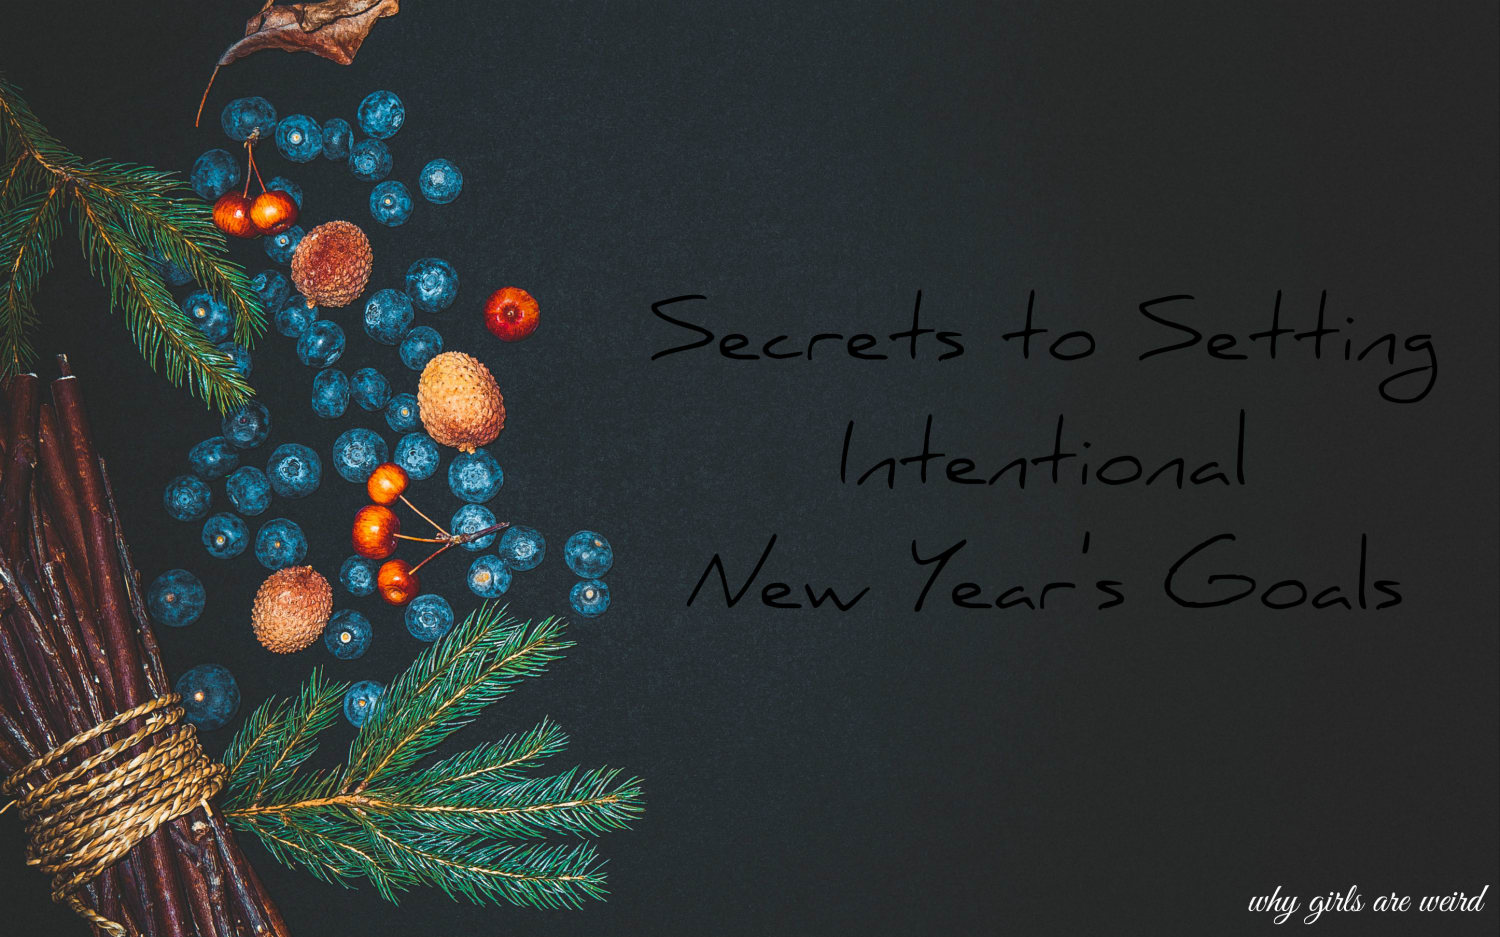 Secrets to Setting Intentional New Year's Goals